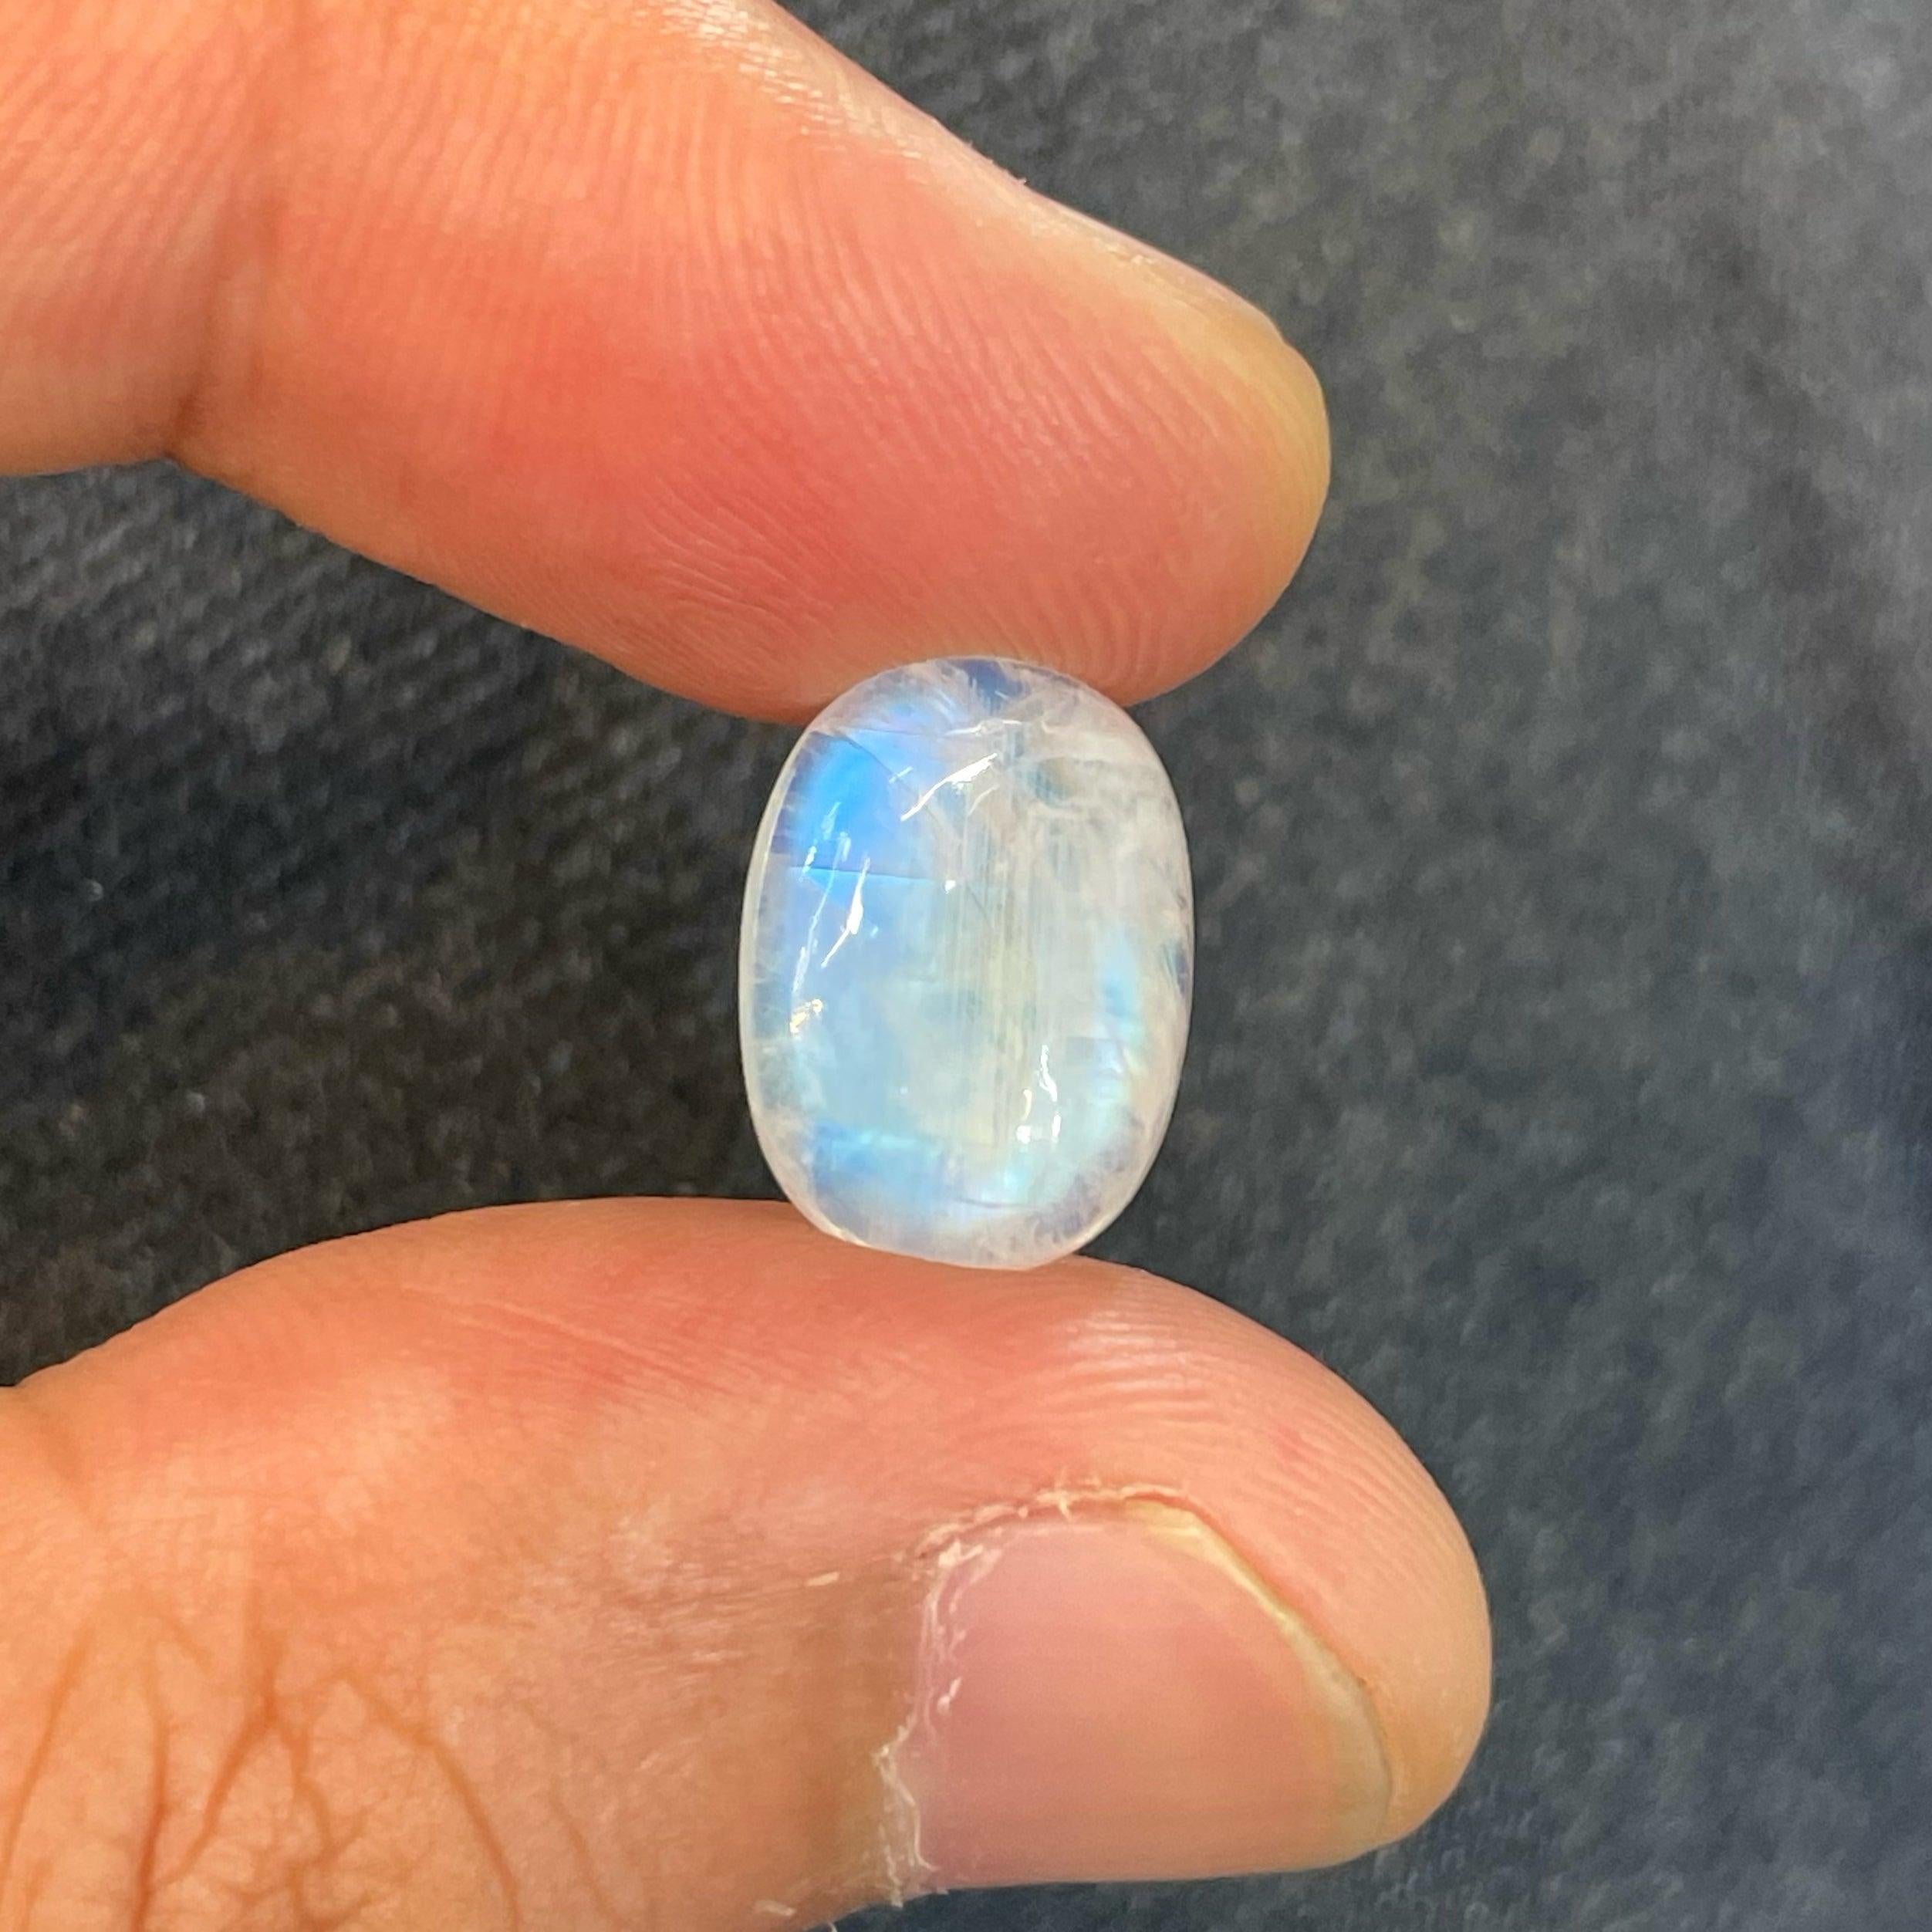 Stunning Natural Loose Moonstone Gem, available for sale at wholesale price, natural high-quality 6.05 carats flawless Included clarity, certified Moonstone from India.

Product Information:
GEMSTONE NAME: Stunning Natural Loose Moonstone